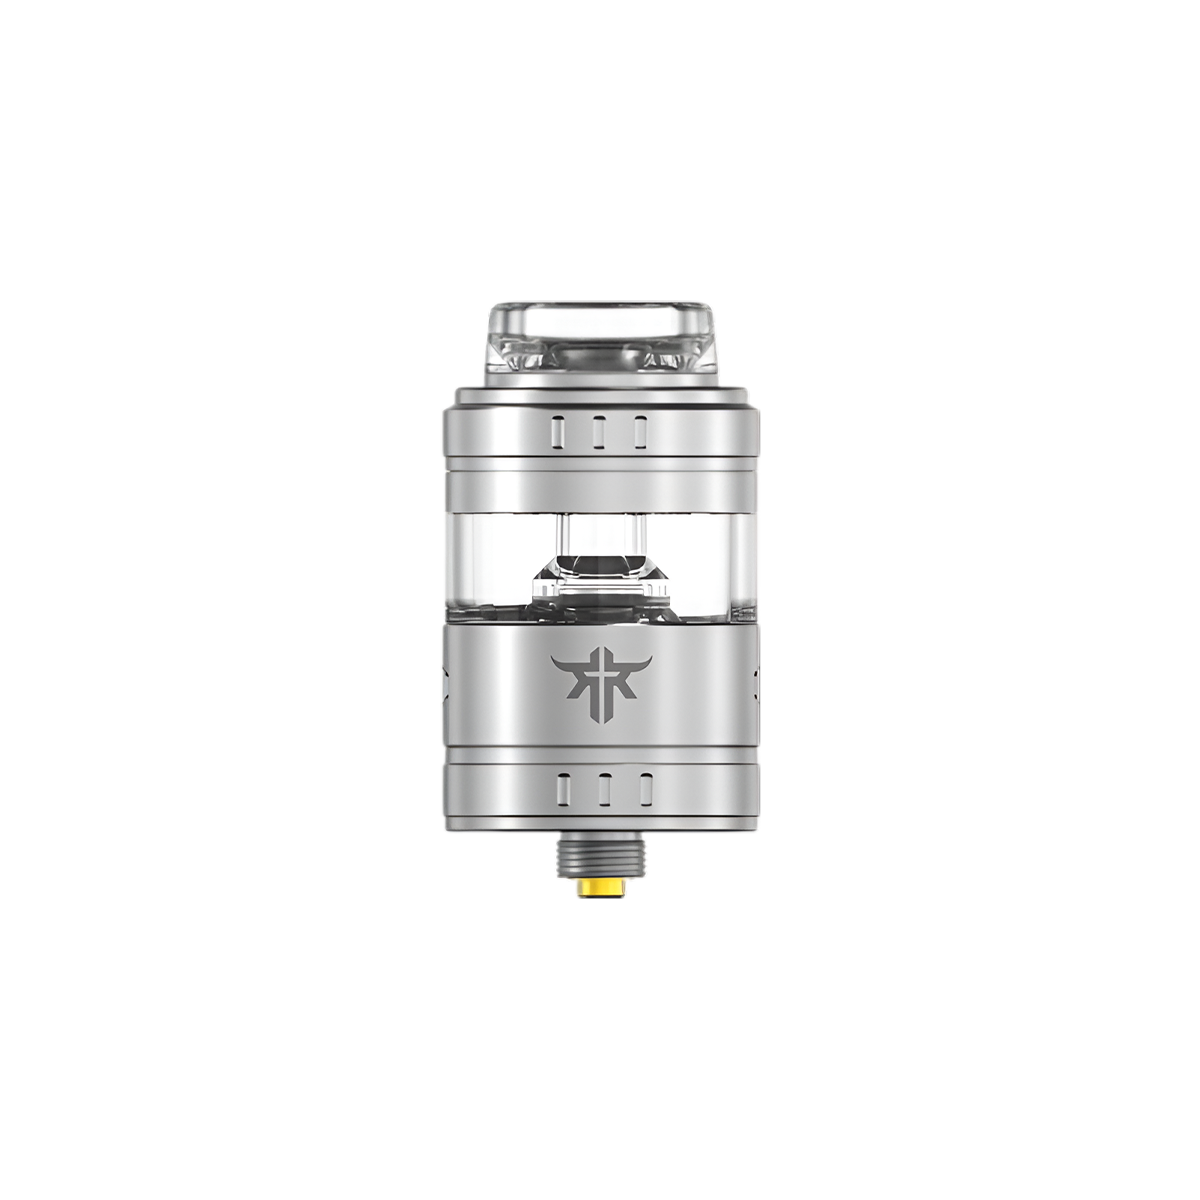 Vandy Vape Requiem Rta Atomizer Replacement Tanks 4.5 Ml Frosted Grey 